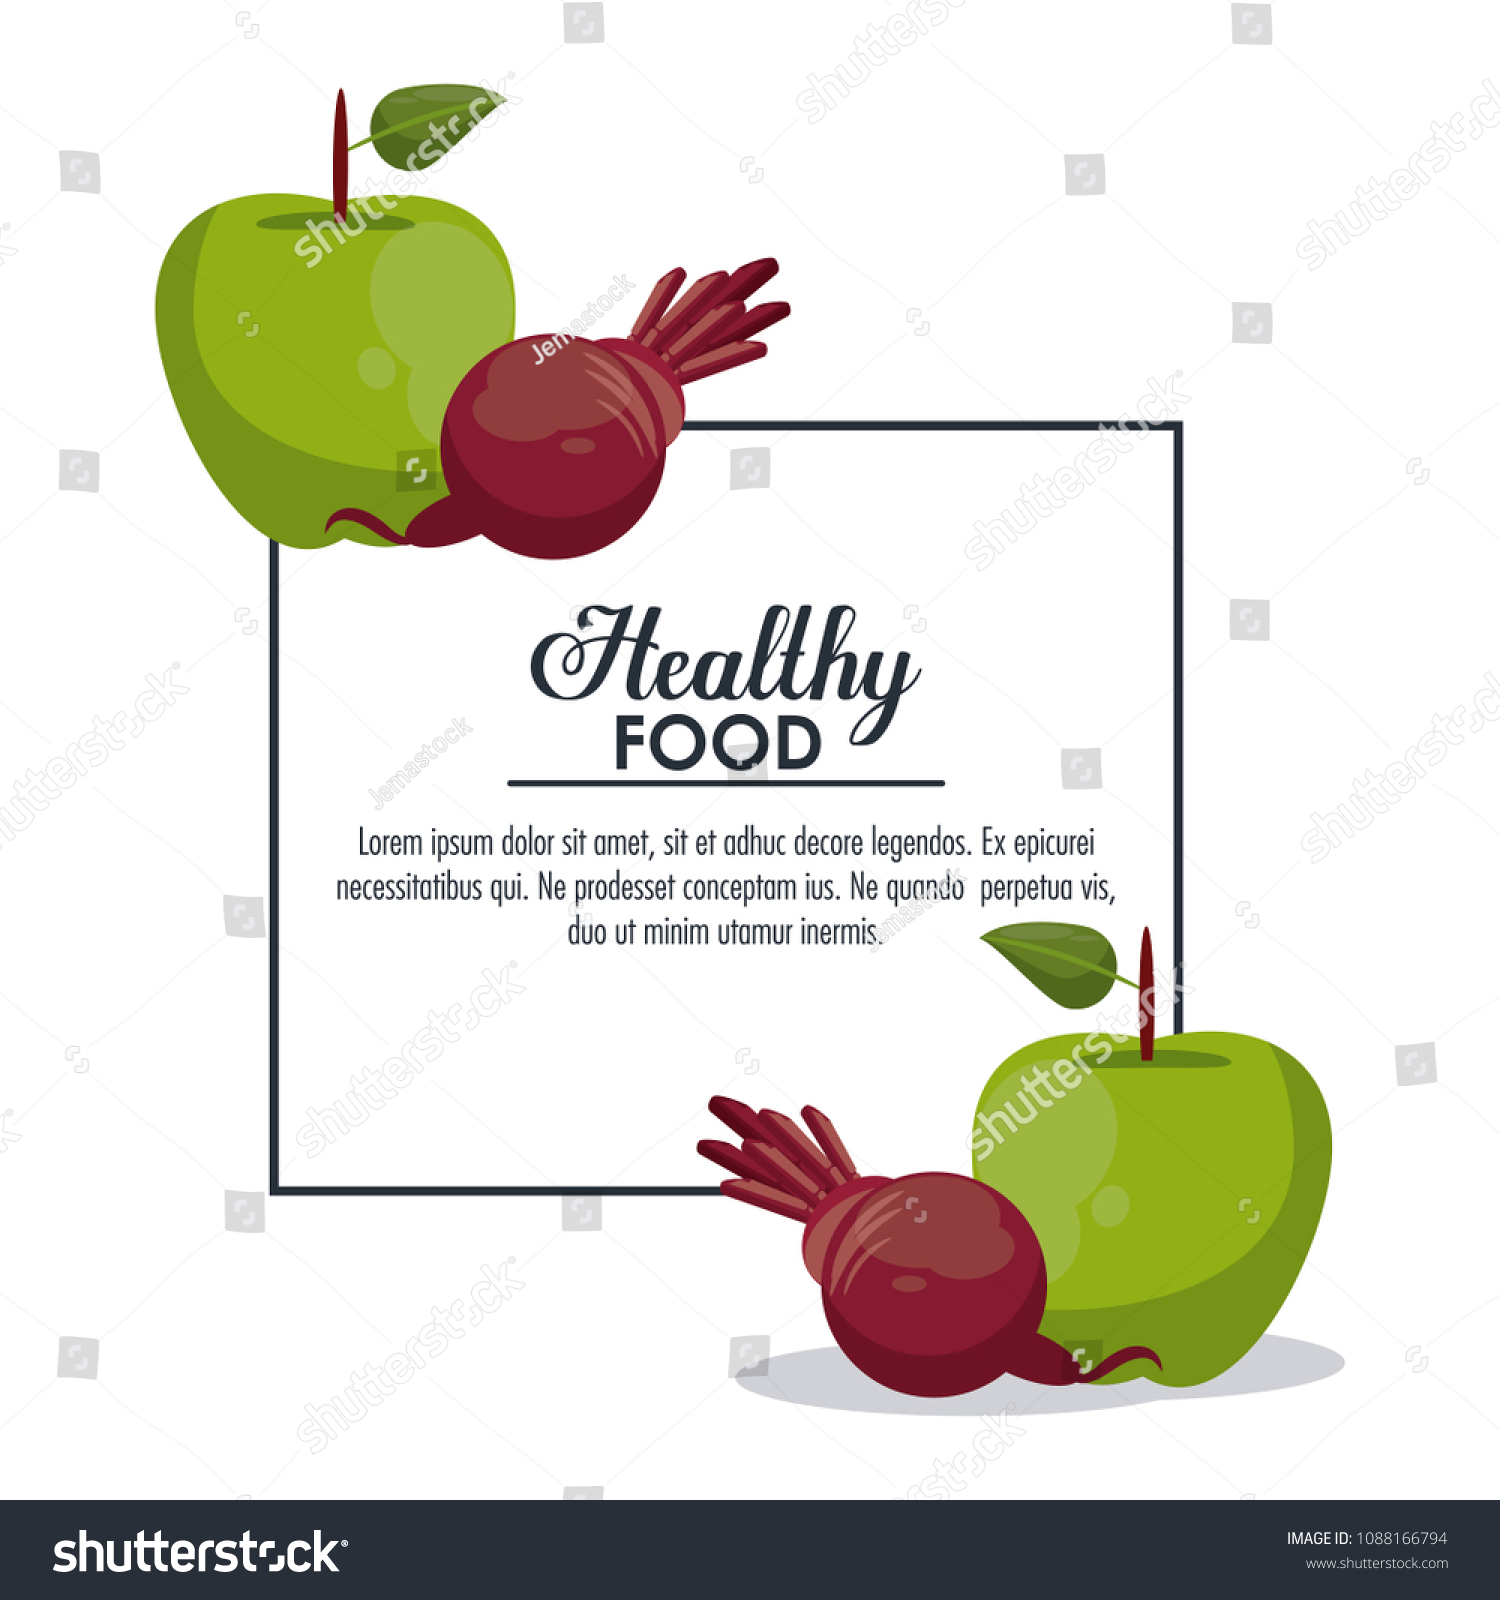 Healthy Food Infographic Stock Vector Royalty Free 1088166794 Shutterstock 3721